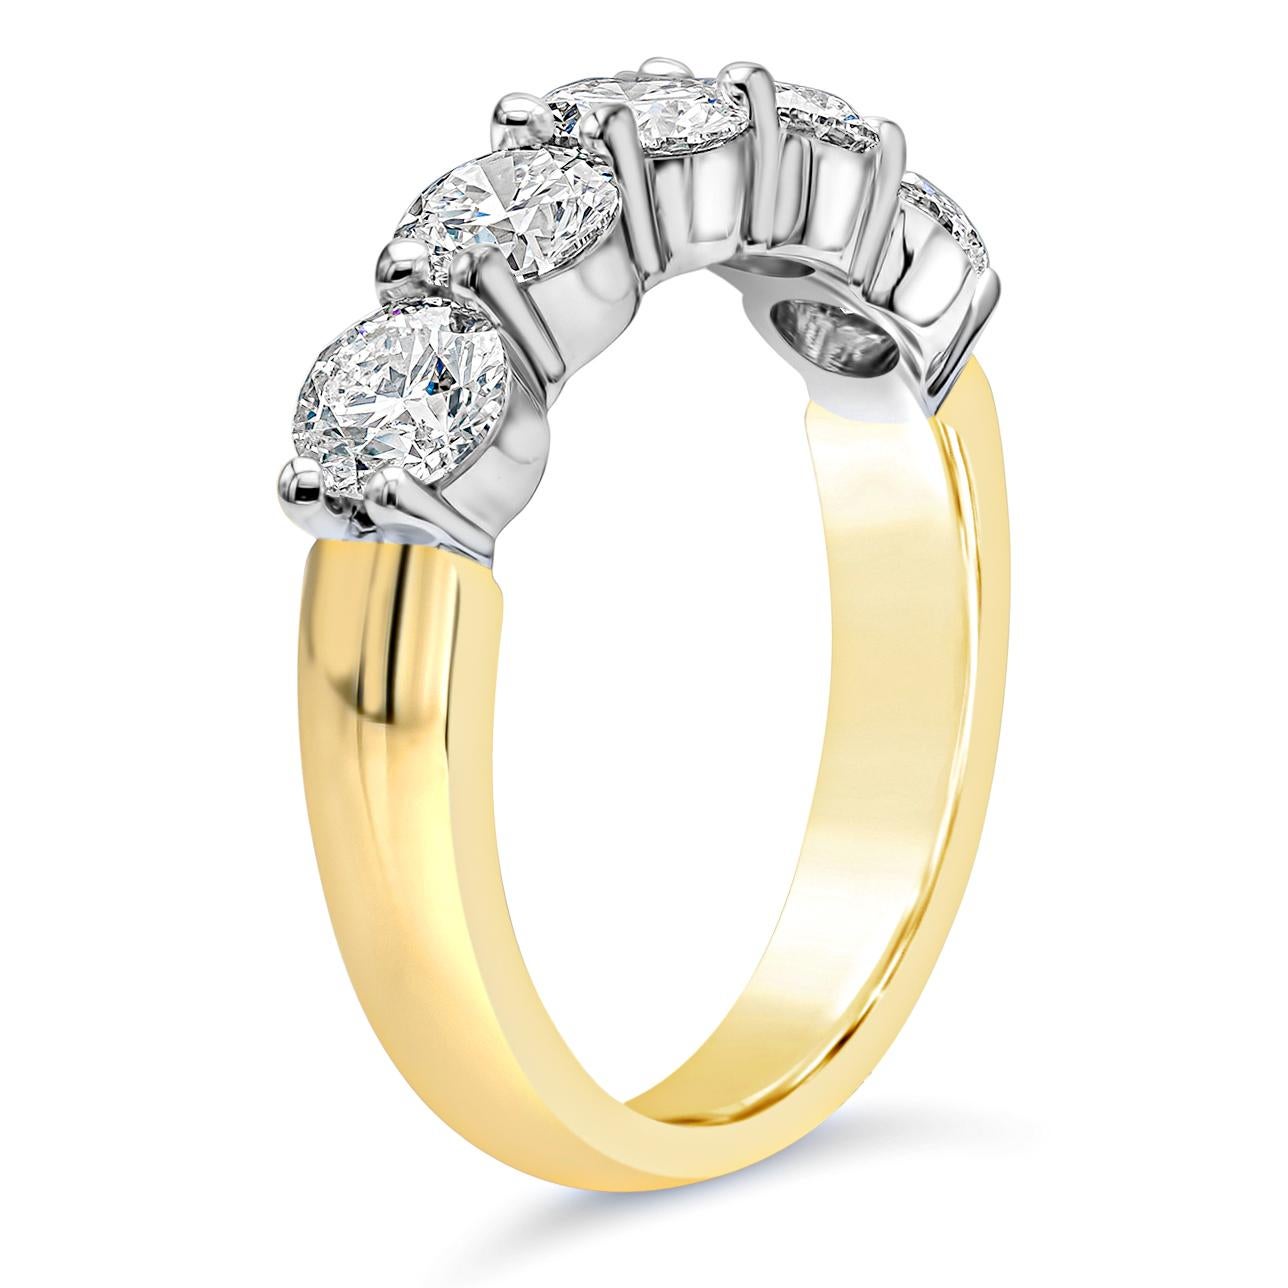 A classic wedding band style showcasing five round brilliant diamonds weighing 1.64 carats total, F Color and Si in Clarity, set in a shared prong basket made in 18K White Gold. Made with 18K Yellow Gold. Size 6.25 US. 

Roman Malakov is a custom